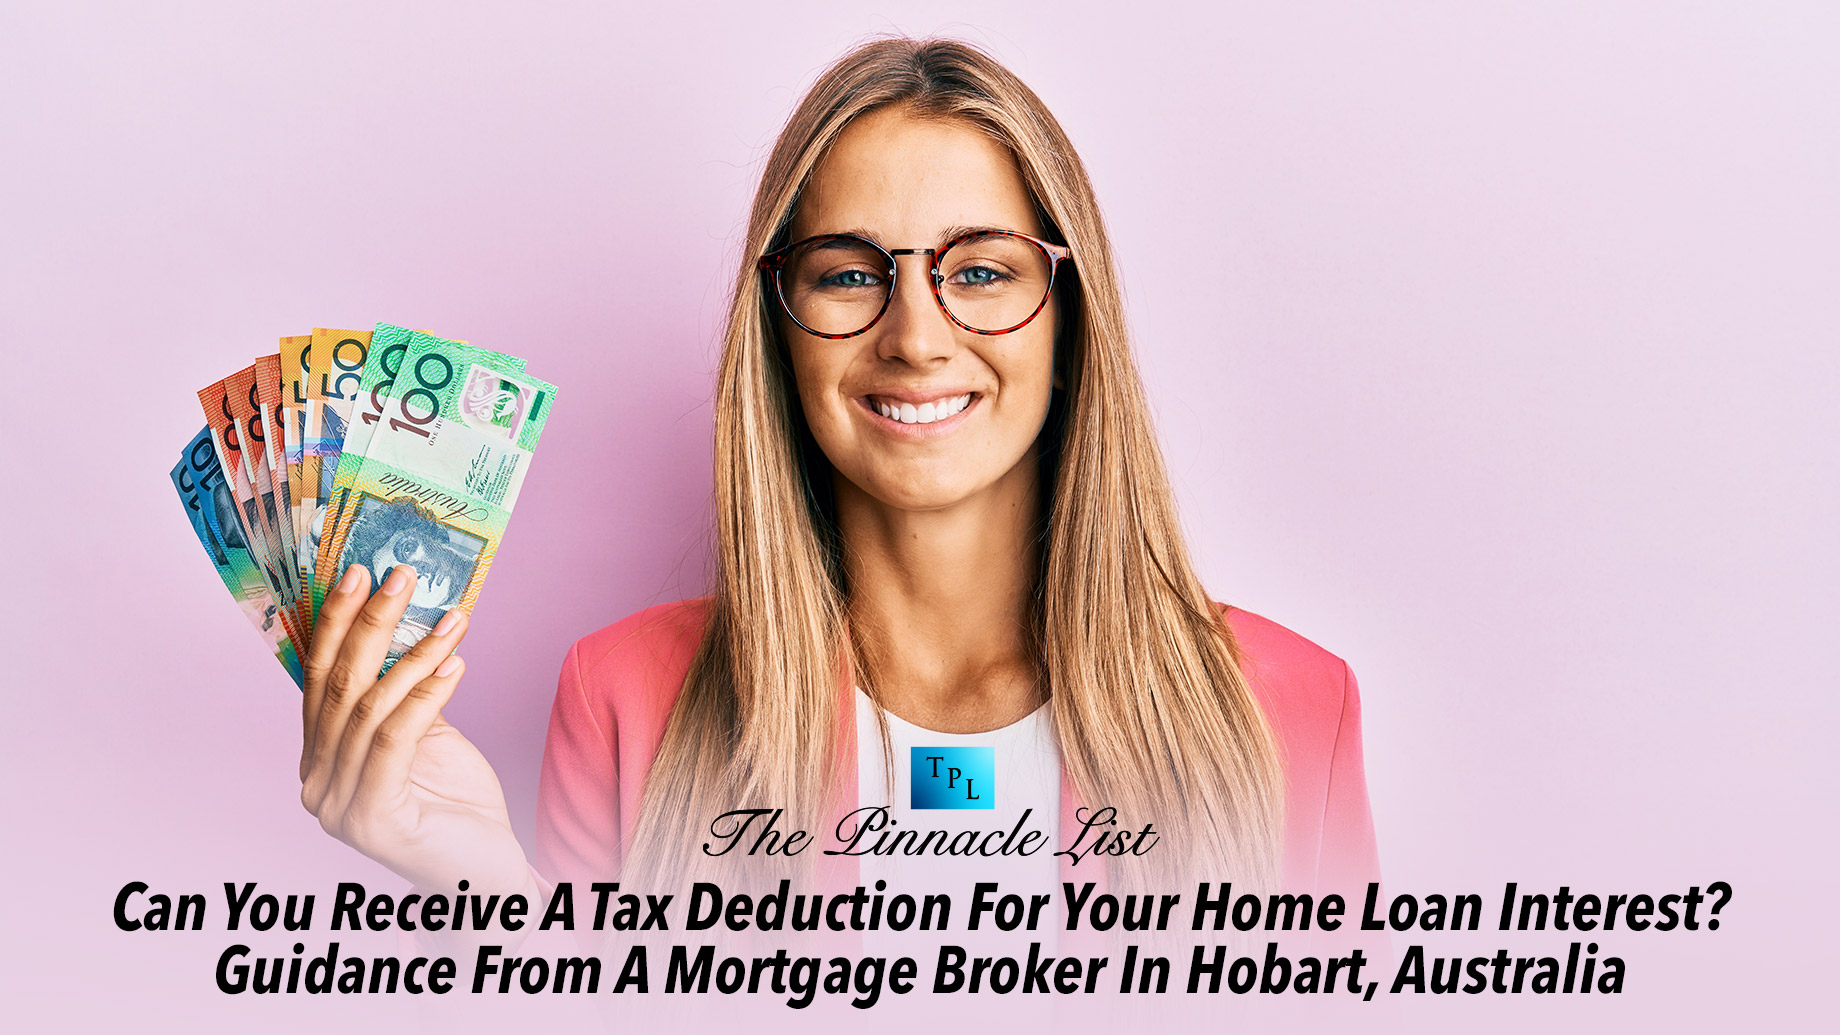 Can You Receive A Tax Deduction For Your Home Loan Interest? Guidance From A Mortgage Broker In Hobart, Australia